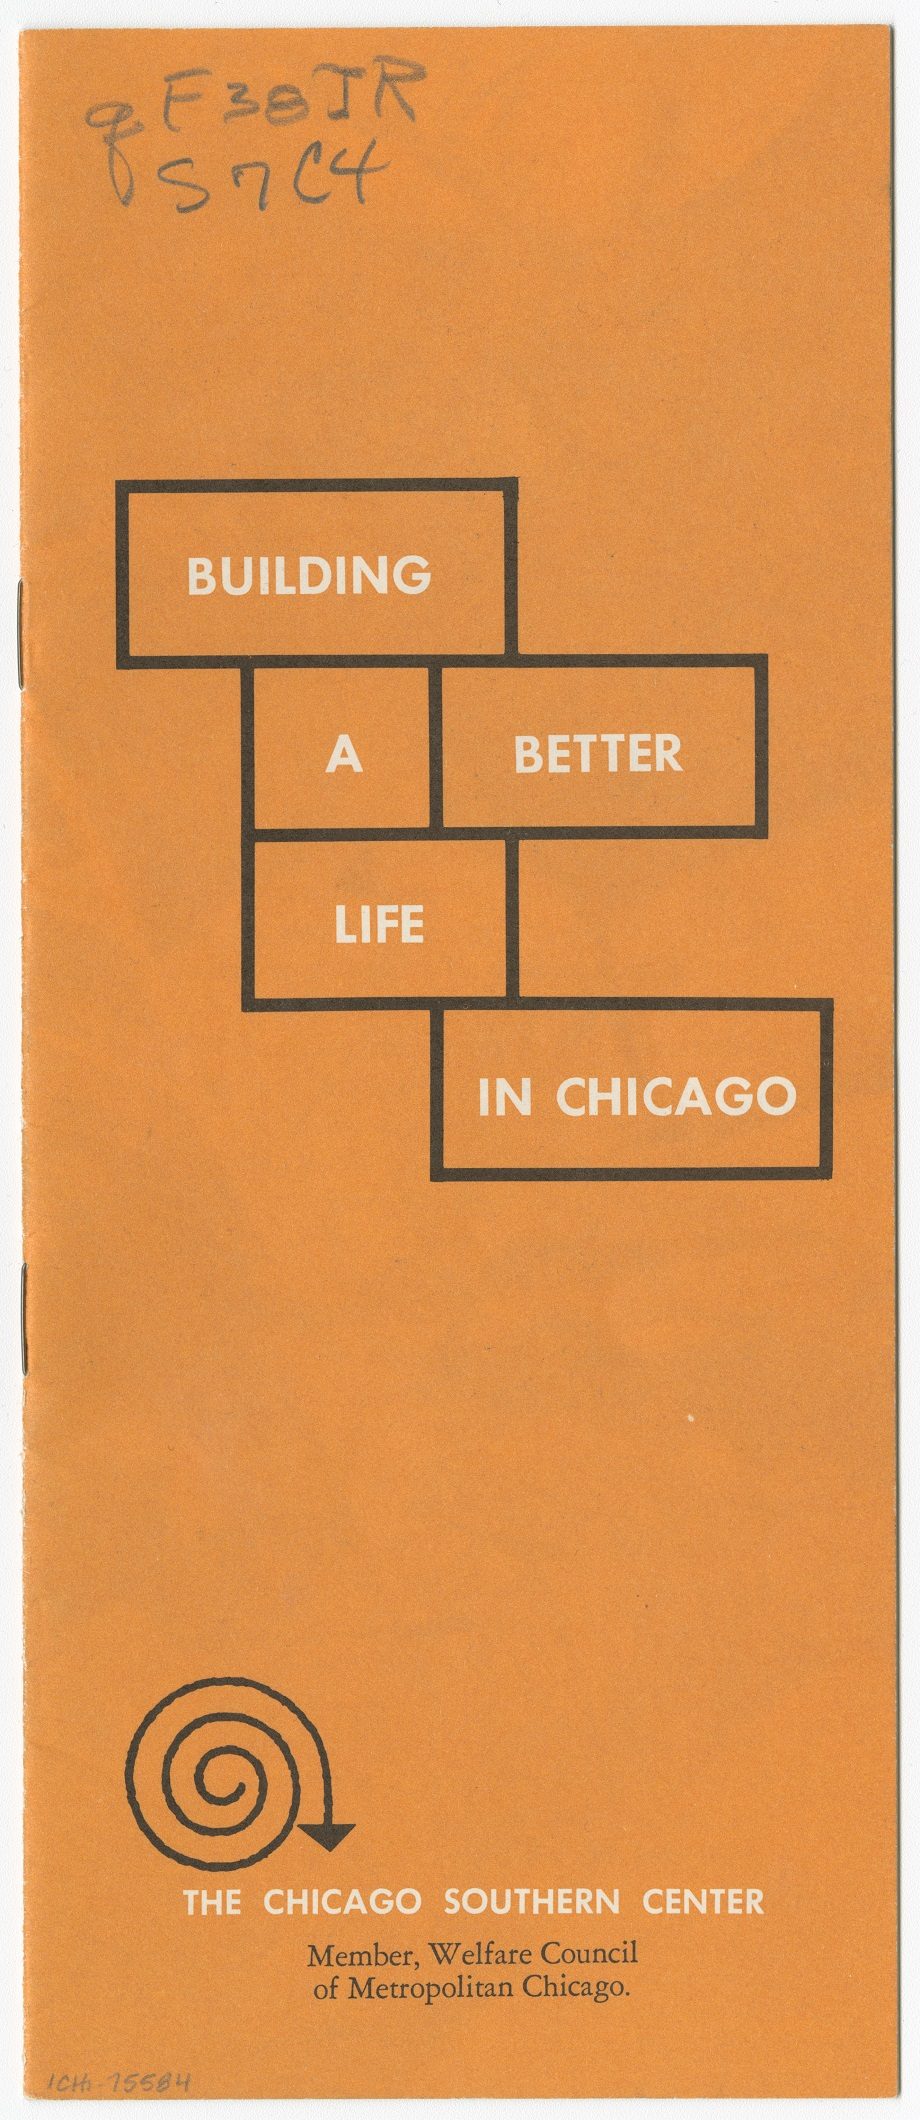 Front cover of a pamphlet titled Building a Better Life in Chicago, published by the Chicago Southern Center, a member of the Welfare Council of Metropolitan Chicago, Chicago, Illinois, 1967.